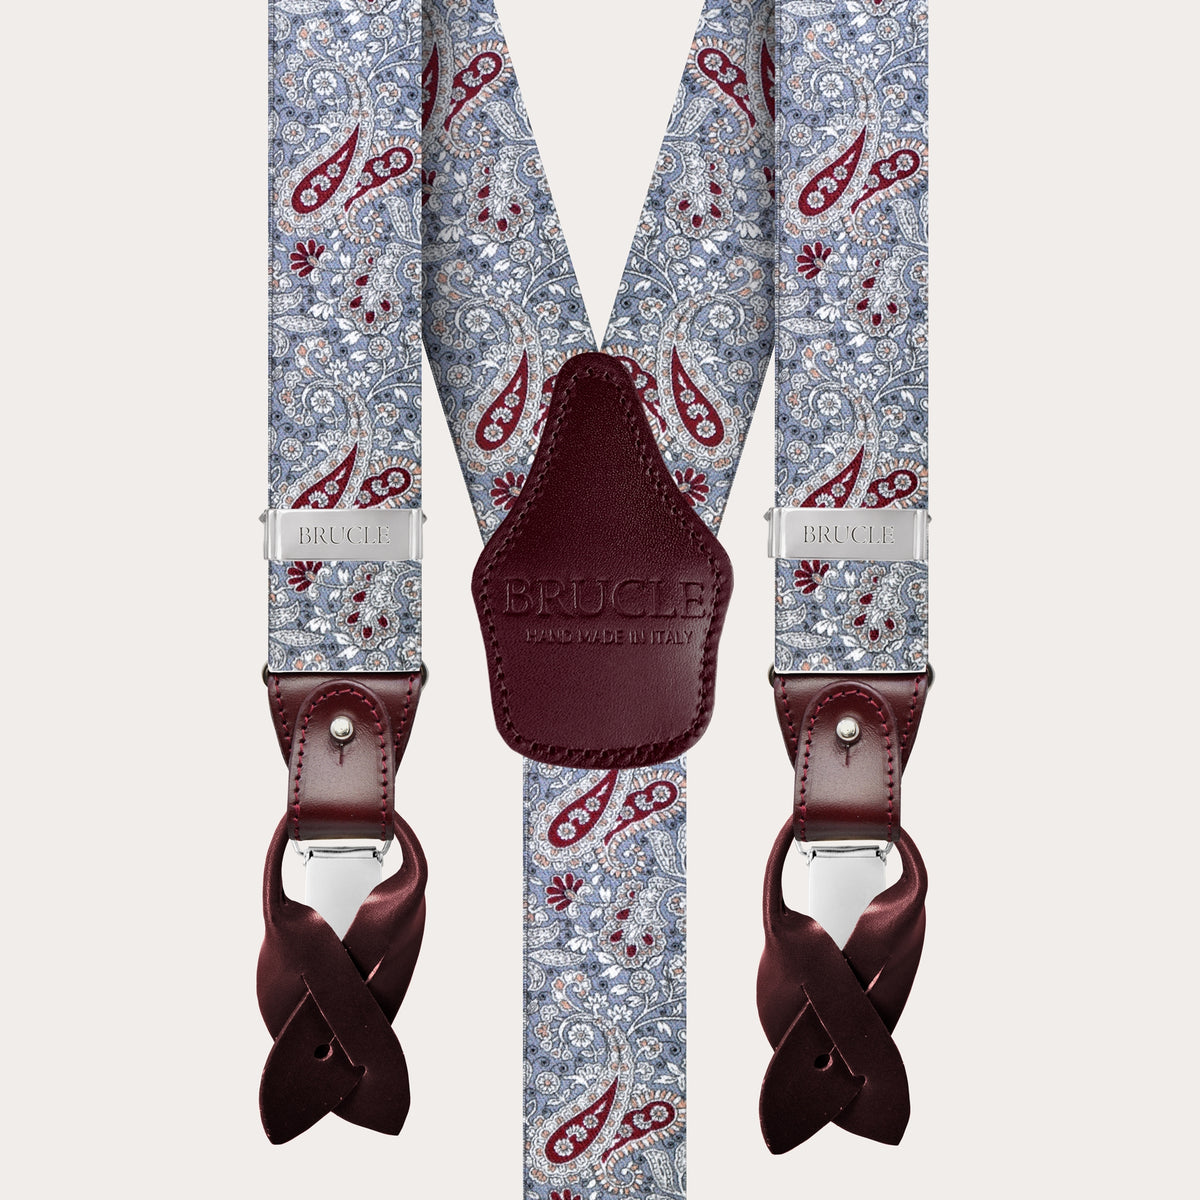 Unisex Y suspenders with satin effect, cachemire pattern